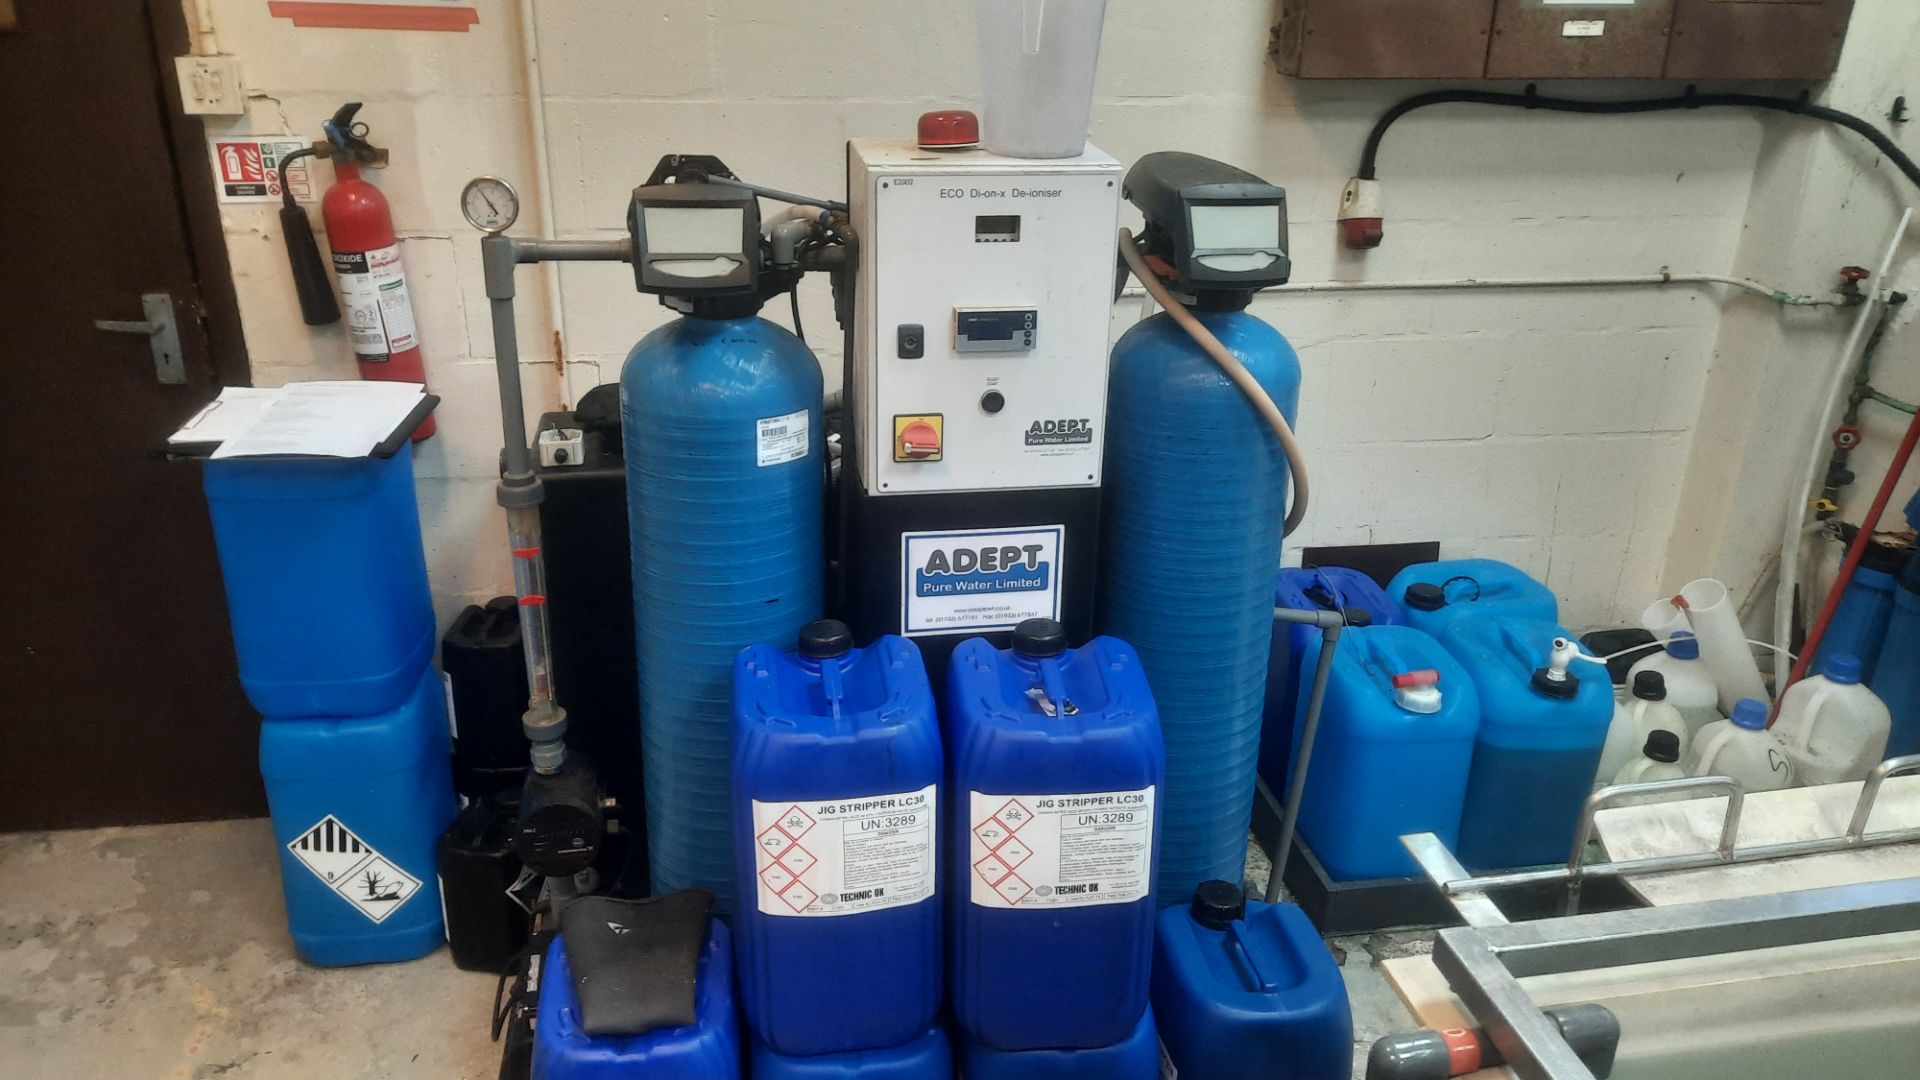 1: Adept, ECO Di-on-x 1.5, Reverse Osmosis Unit, Serial Number: 226, Year of Manufacture: April 2015